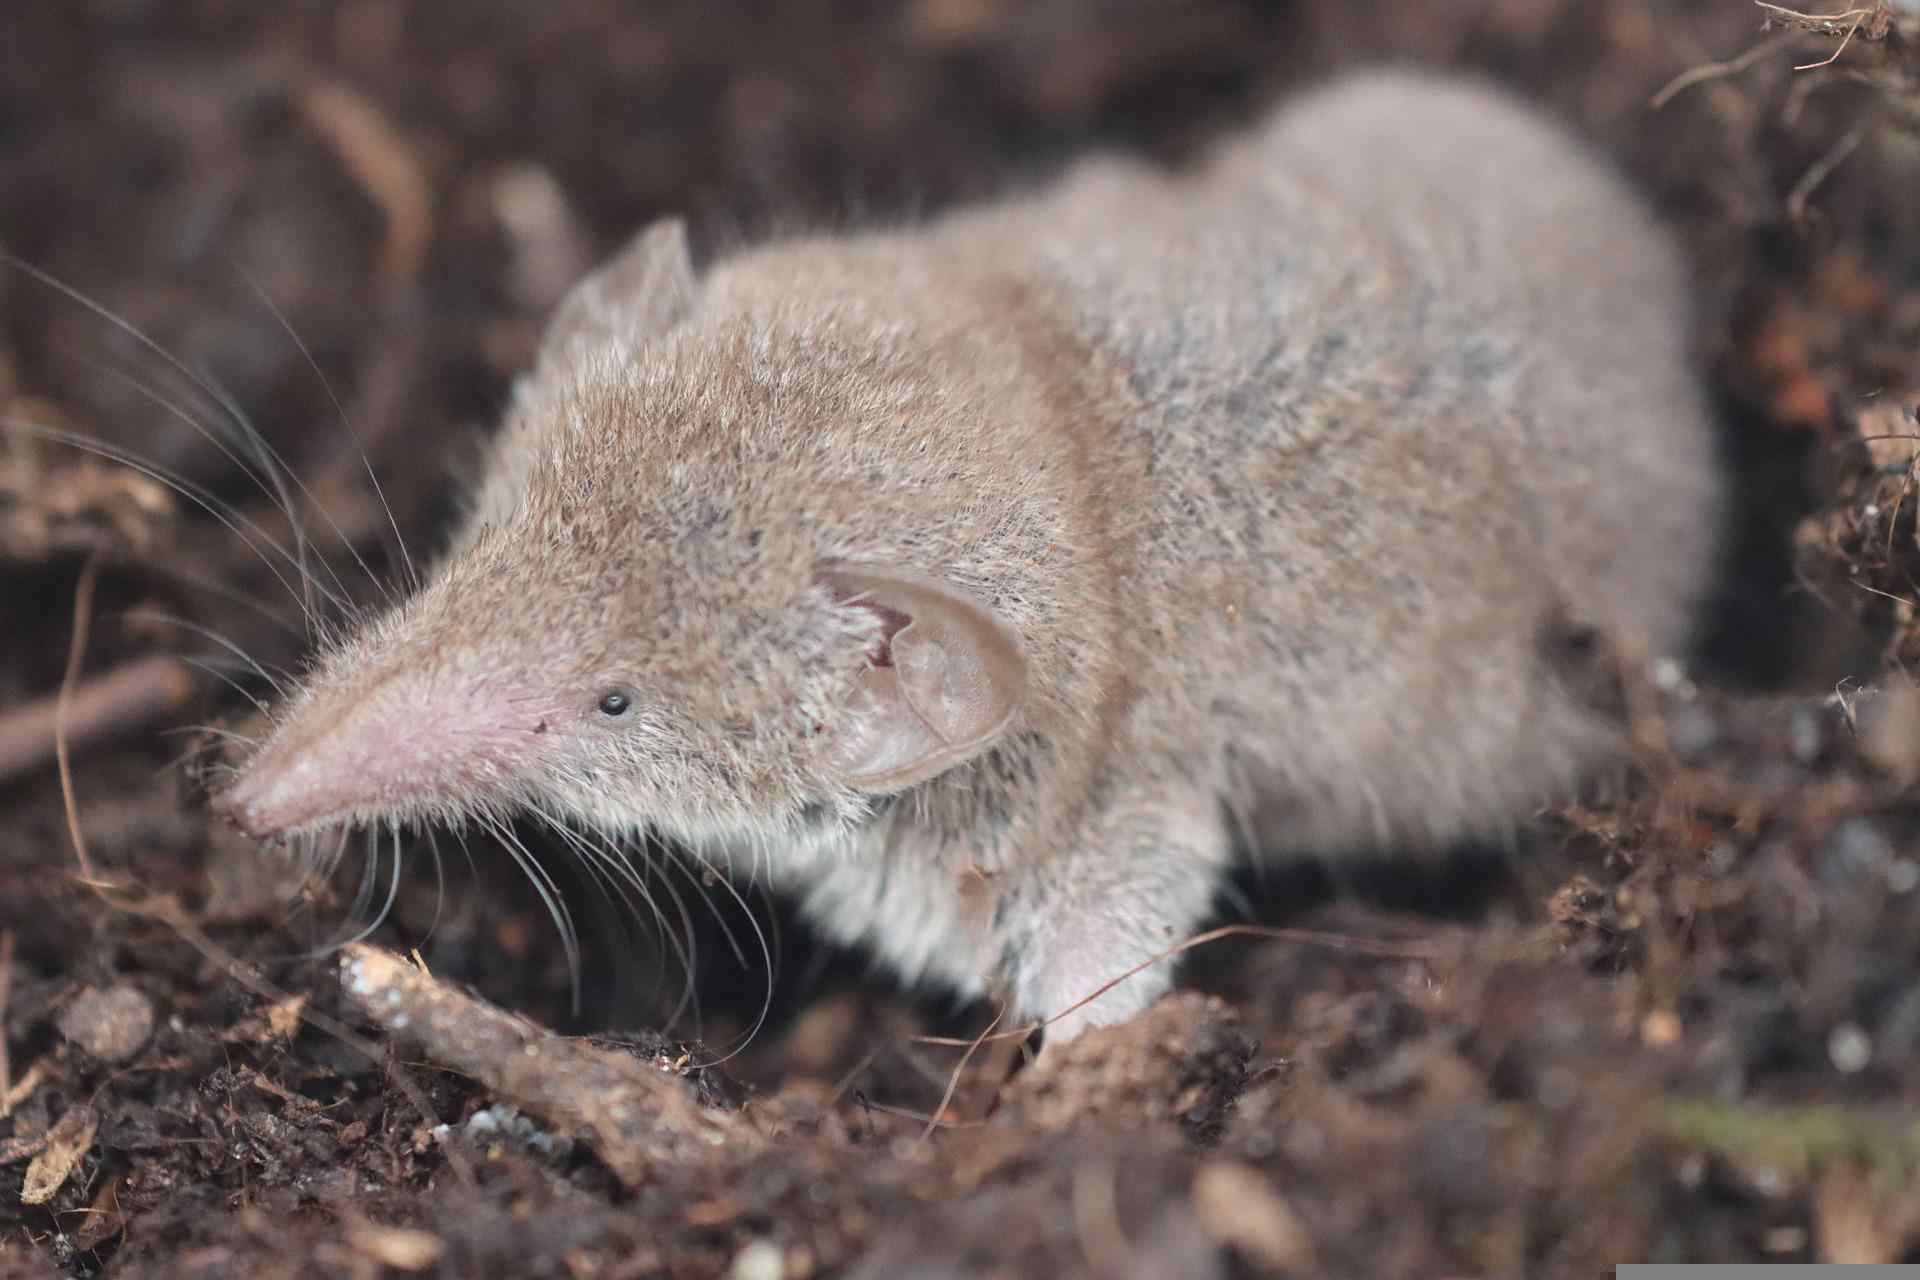 Know all about the characteristics and habitat of shrew.